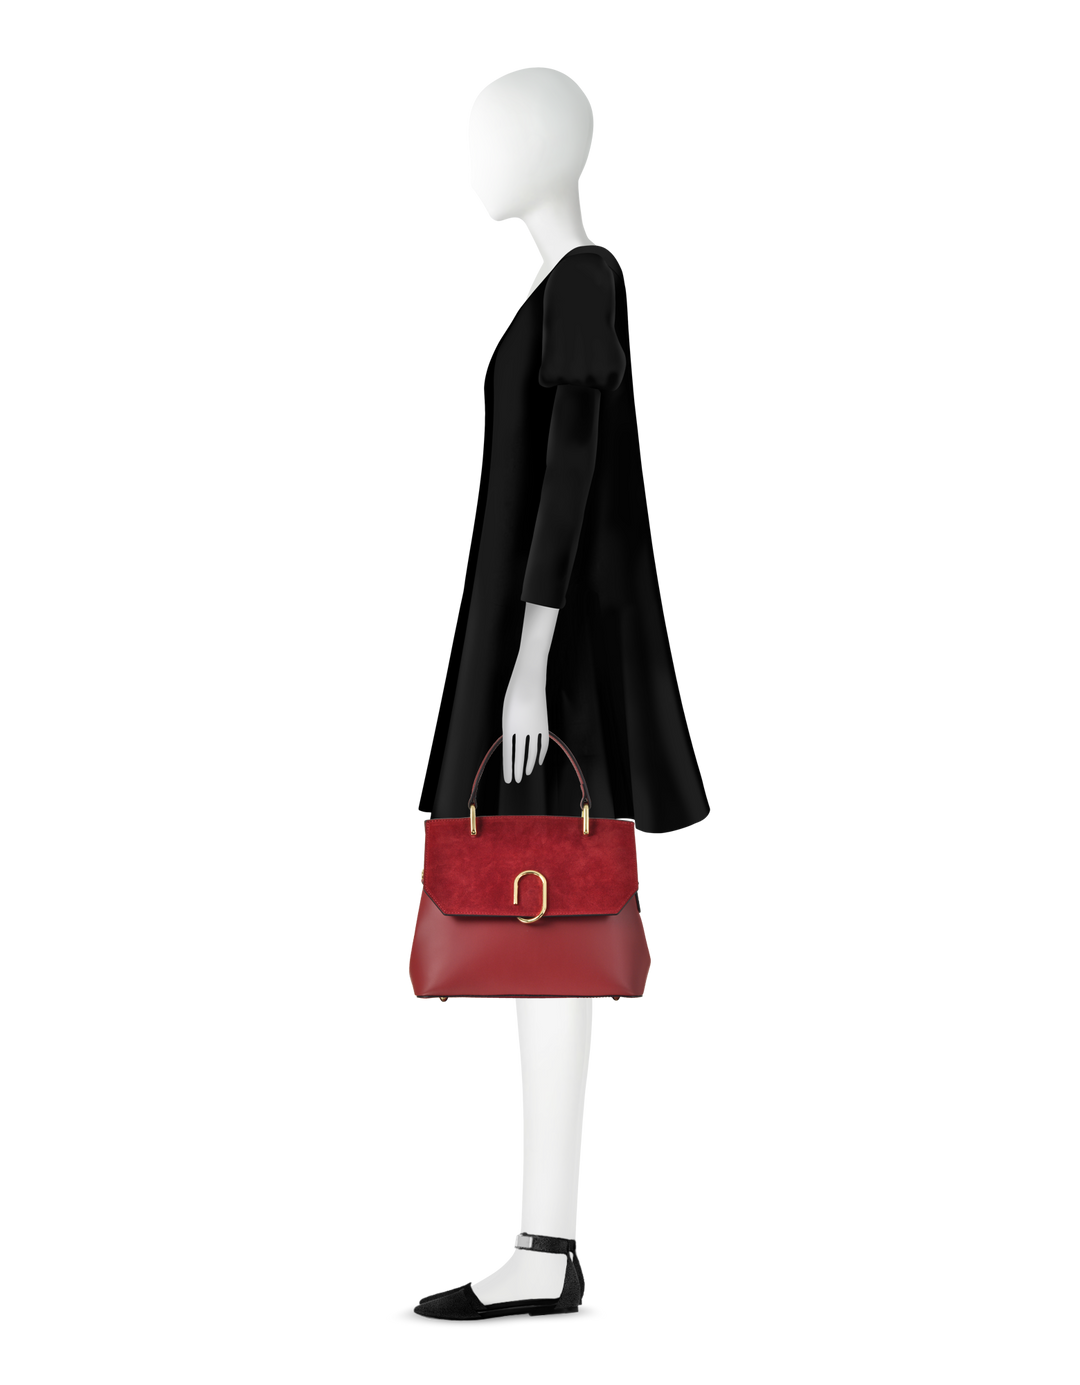 Fashion mannequin in black dress holding a stylish red handbag with gold accents